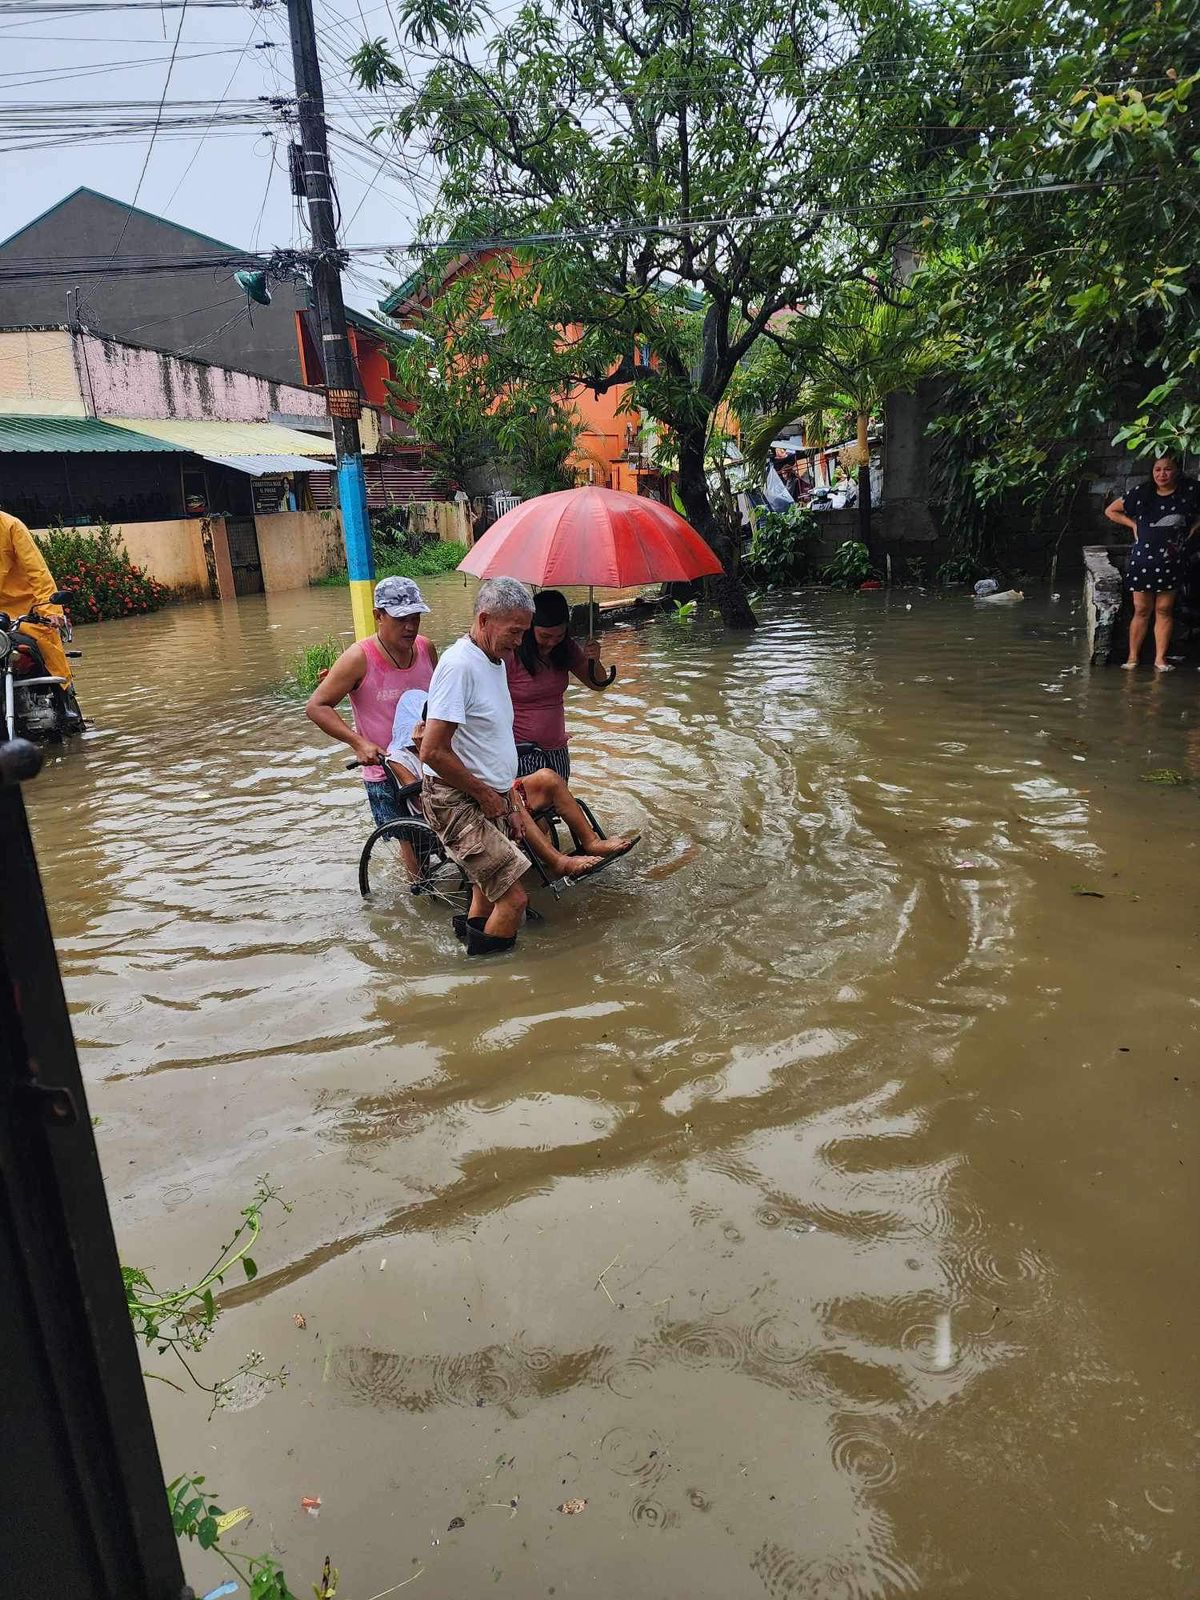 Situation at Magdalena in Balagtas, Bulacan as of 1:30 p.m. on Wednesday, July 24, with floods caused by heavy rains brought by Typhoon Carina and the southwest monsoon.